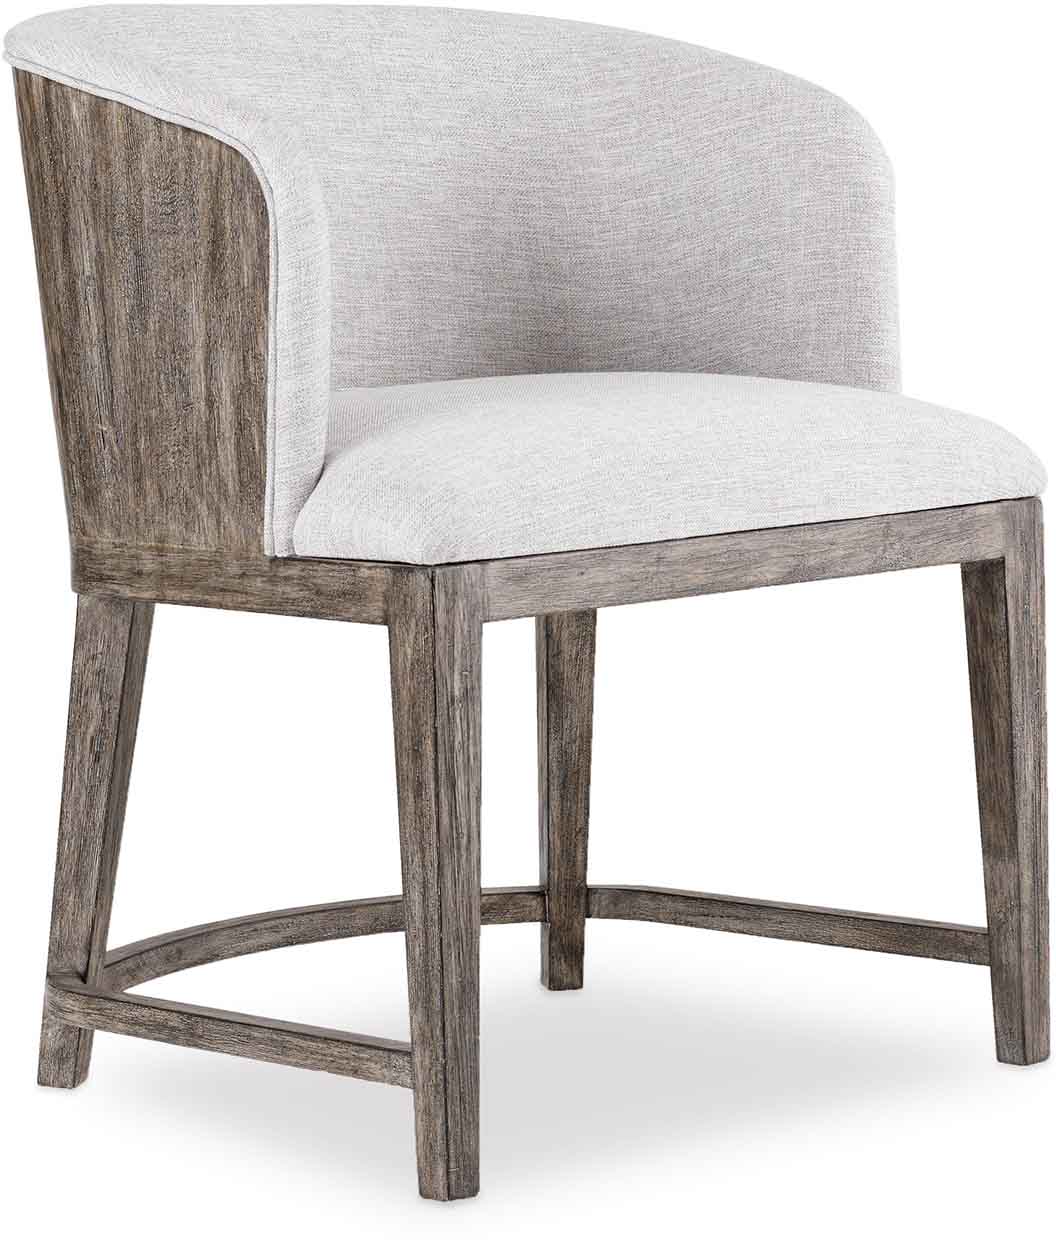 Hooker Furniture Dining Room Curata Upholstered Chair w/wood back - Dreamart Gallery